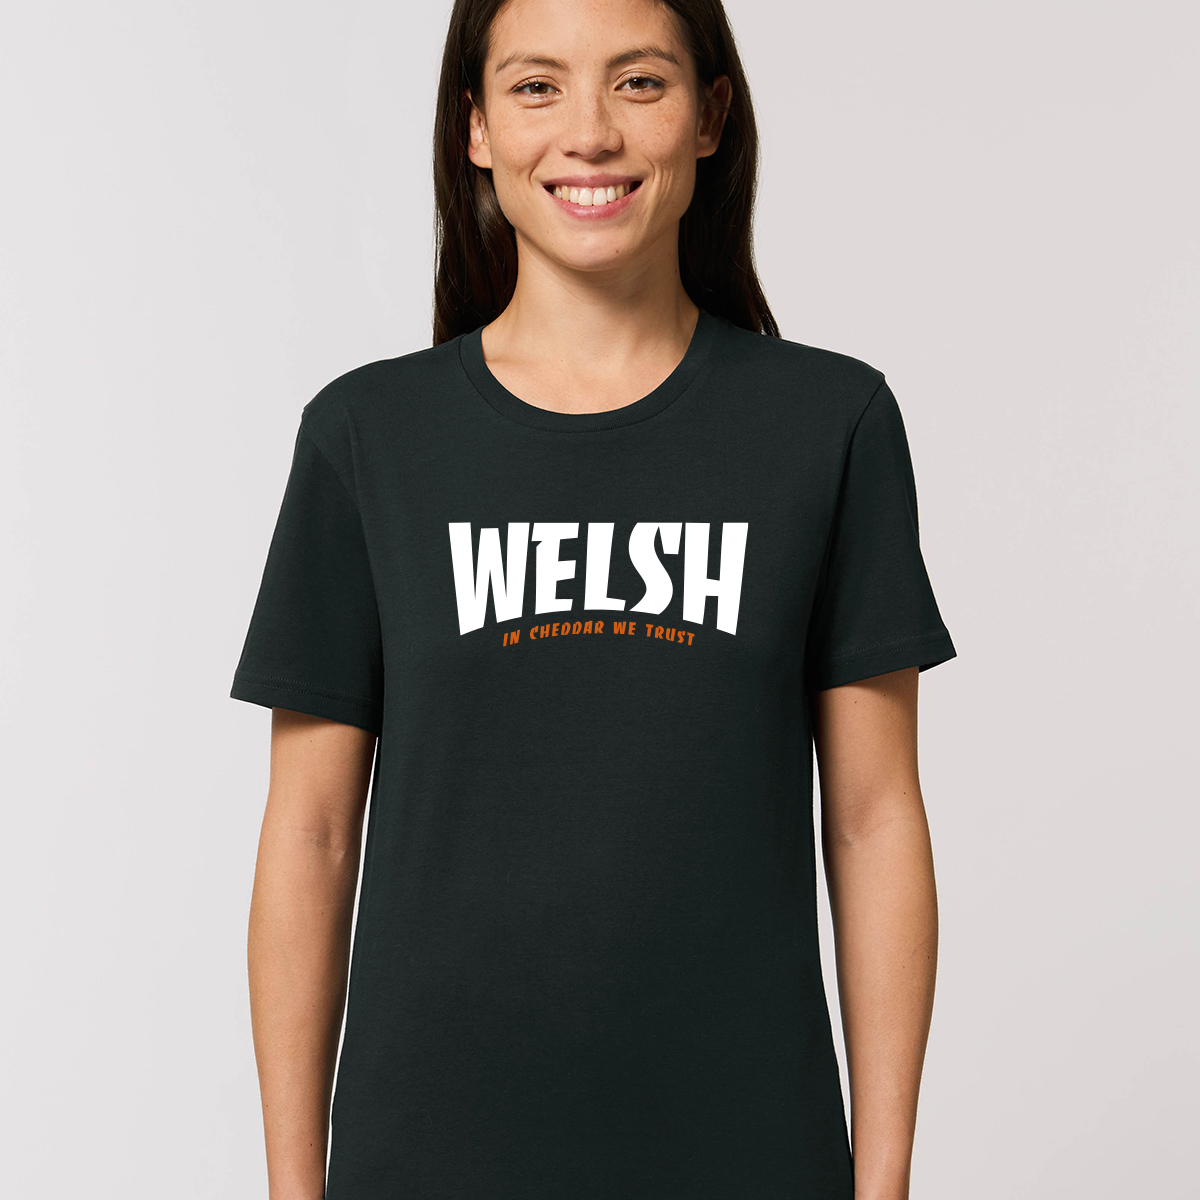 WELSH - IN CHEDDAR WE TRUST